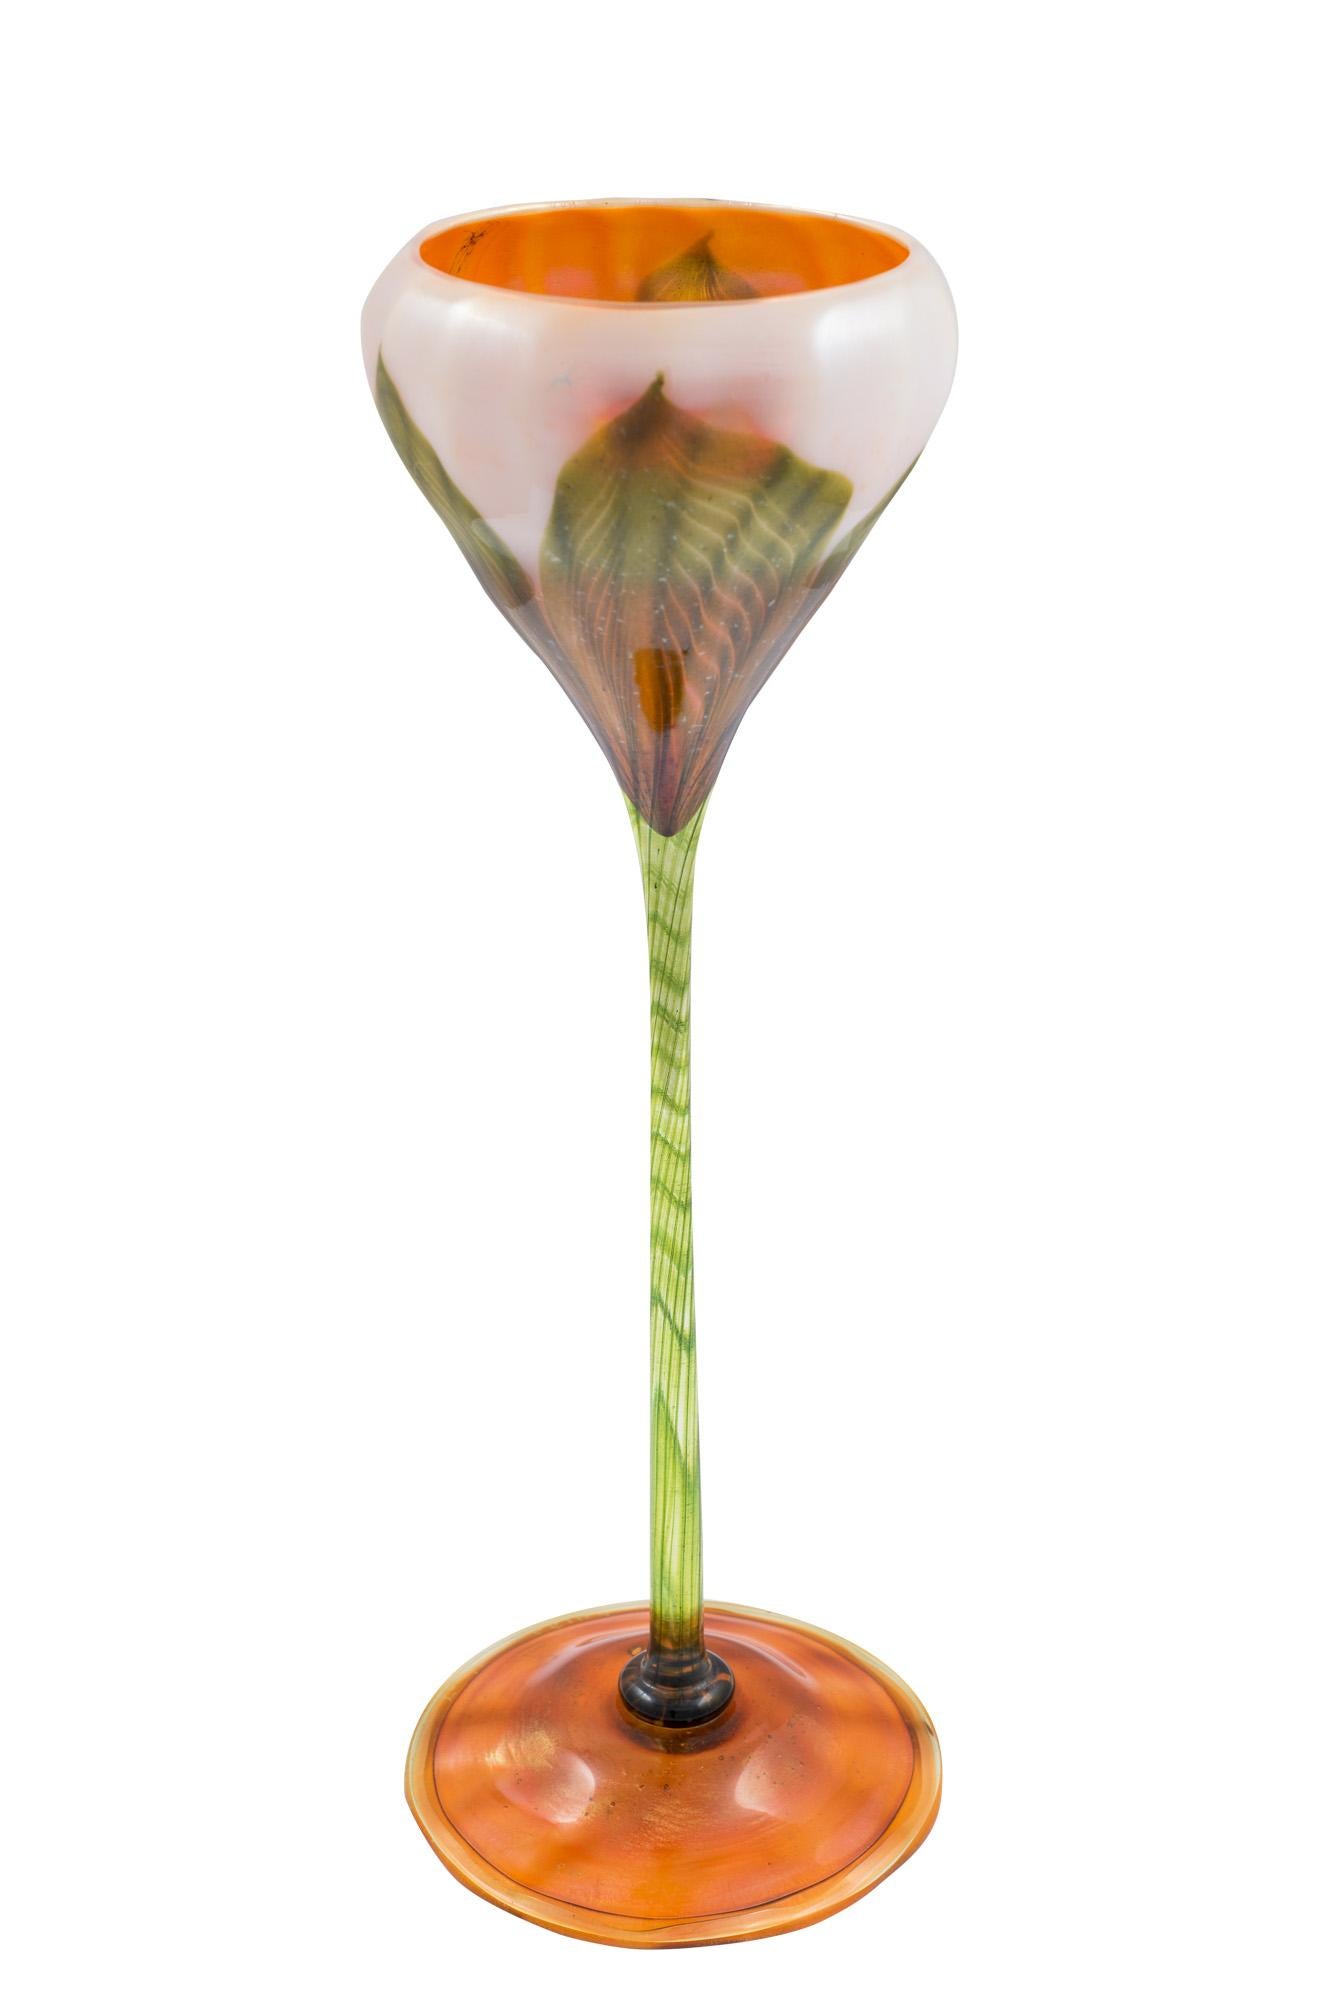 Art glass Floriform vase Louis Comfort Tiffany Studios New York 1906 green orange

The company Louis comfort Tiffany was one of the most important and most famous art manufactures in America around the turn of the century. Next to the famous lamps